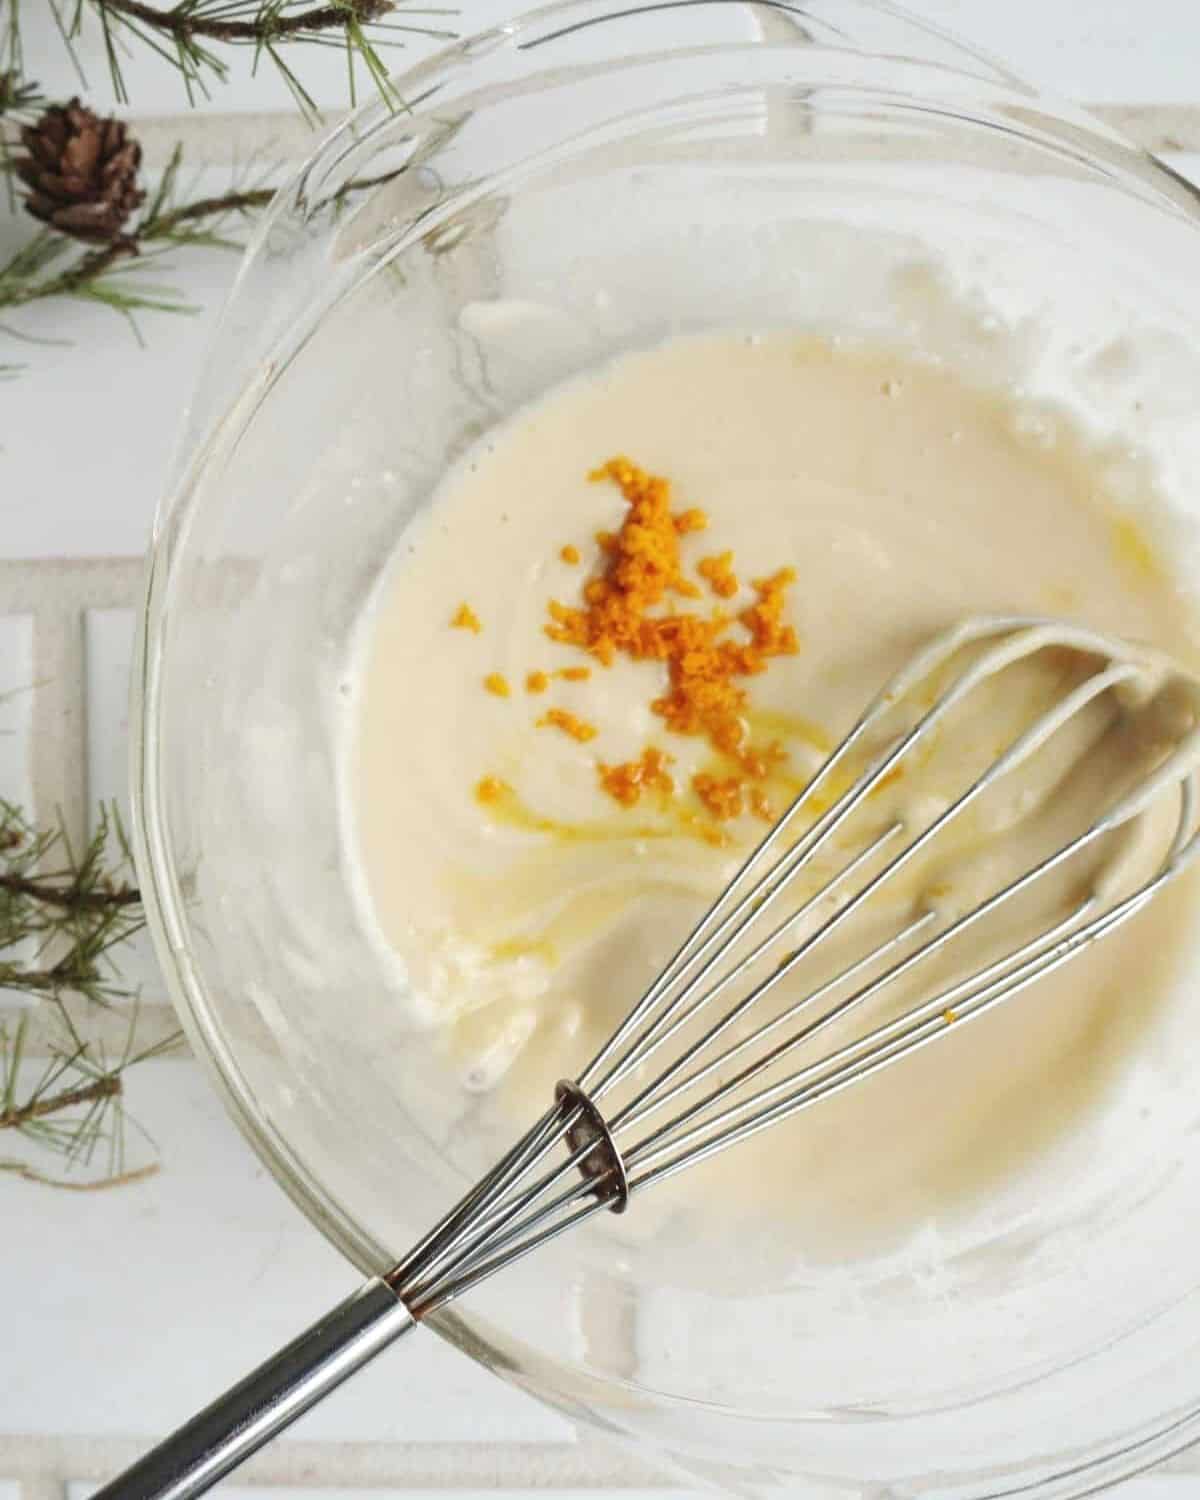 The icing being whisked together in a glass bowl.